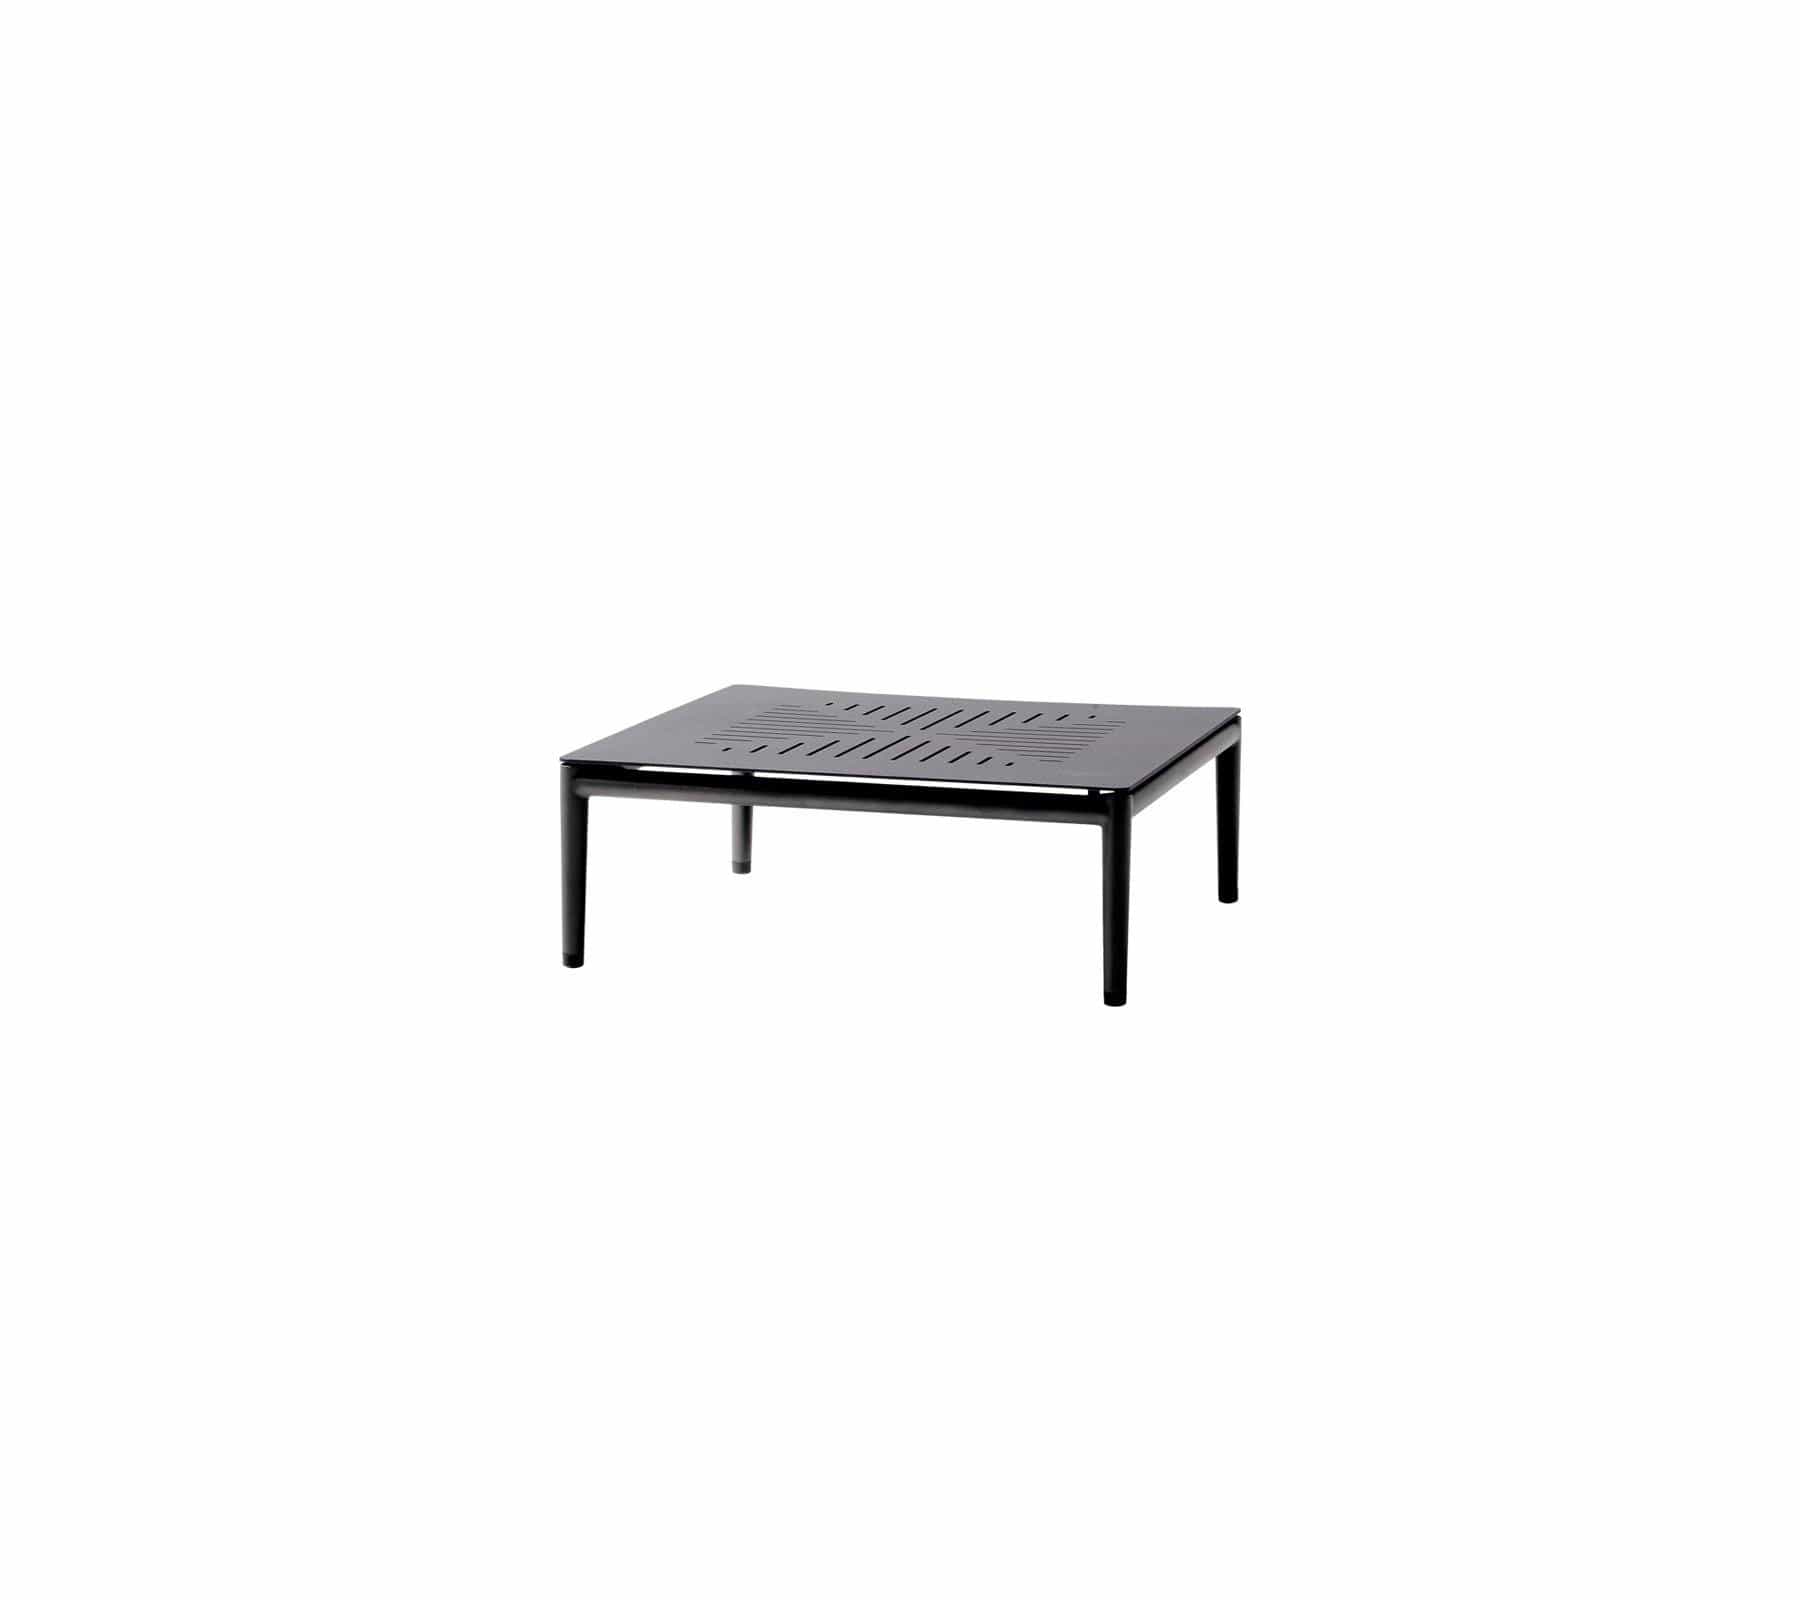 Cane-Line Denmark Outdoor Coffee Table Copy of Conic coffee table 75x75 cm